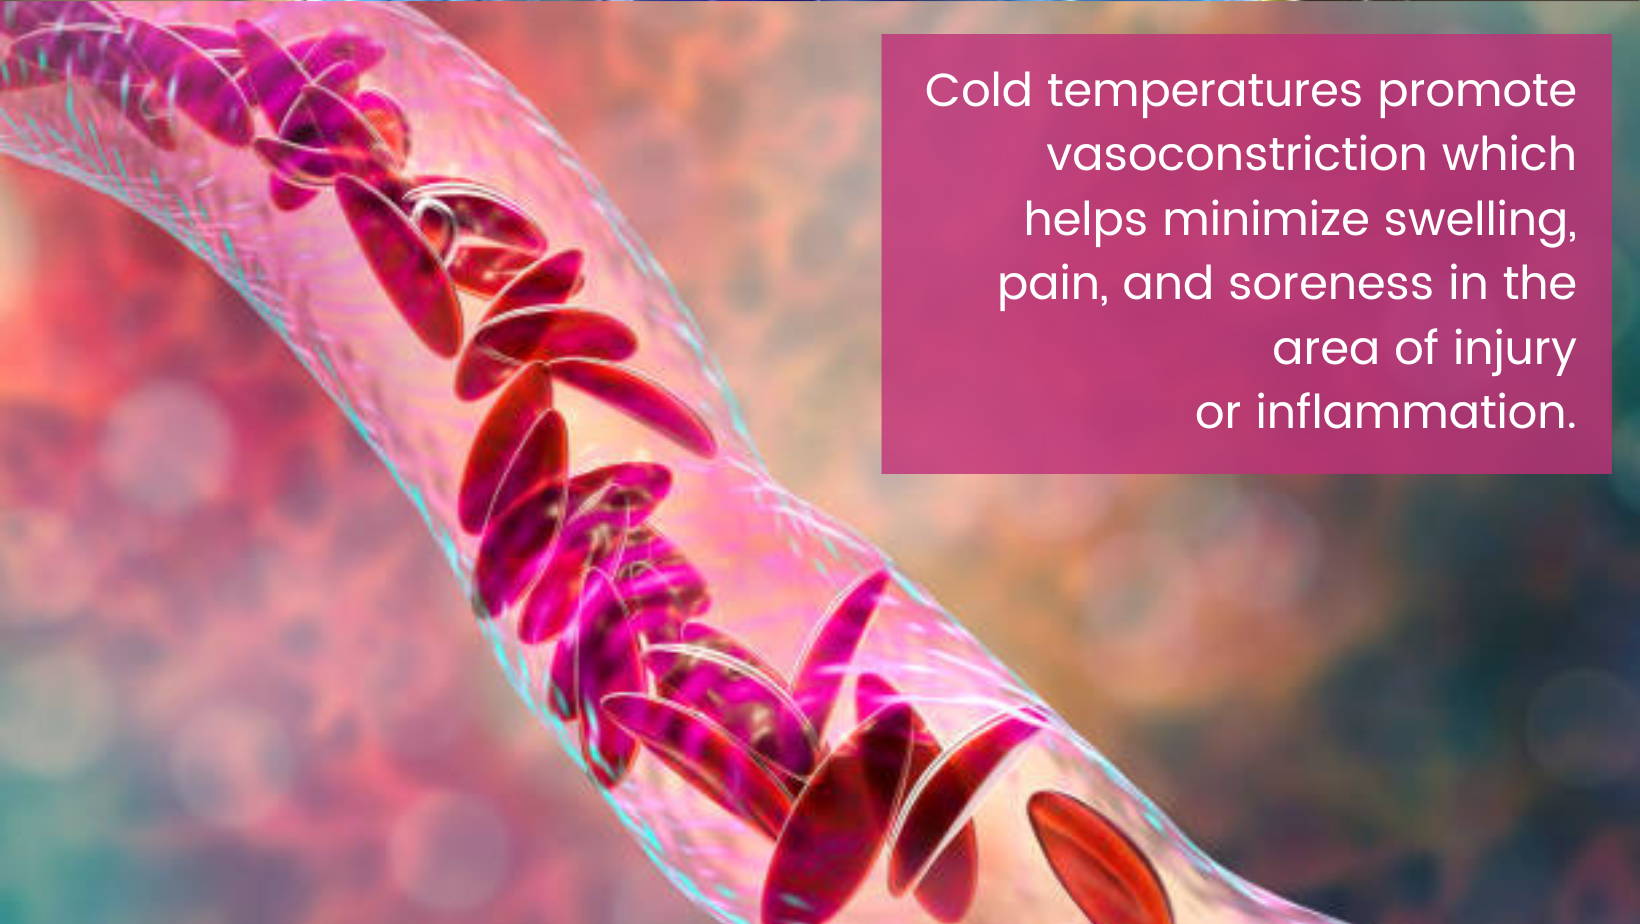 Cold temperatures promote vasoconstriction which helps minimize swelling, pain, and soreness in the area of injury or inflammation.